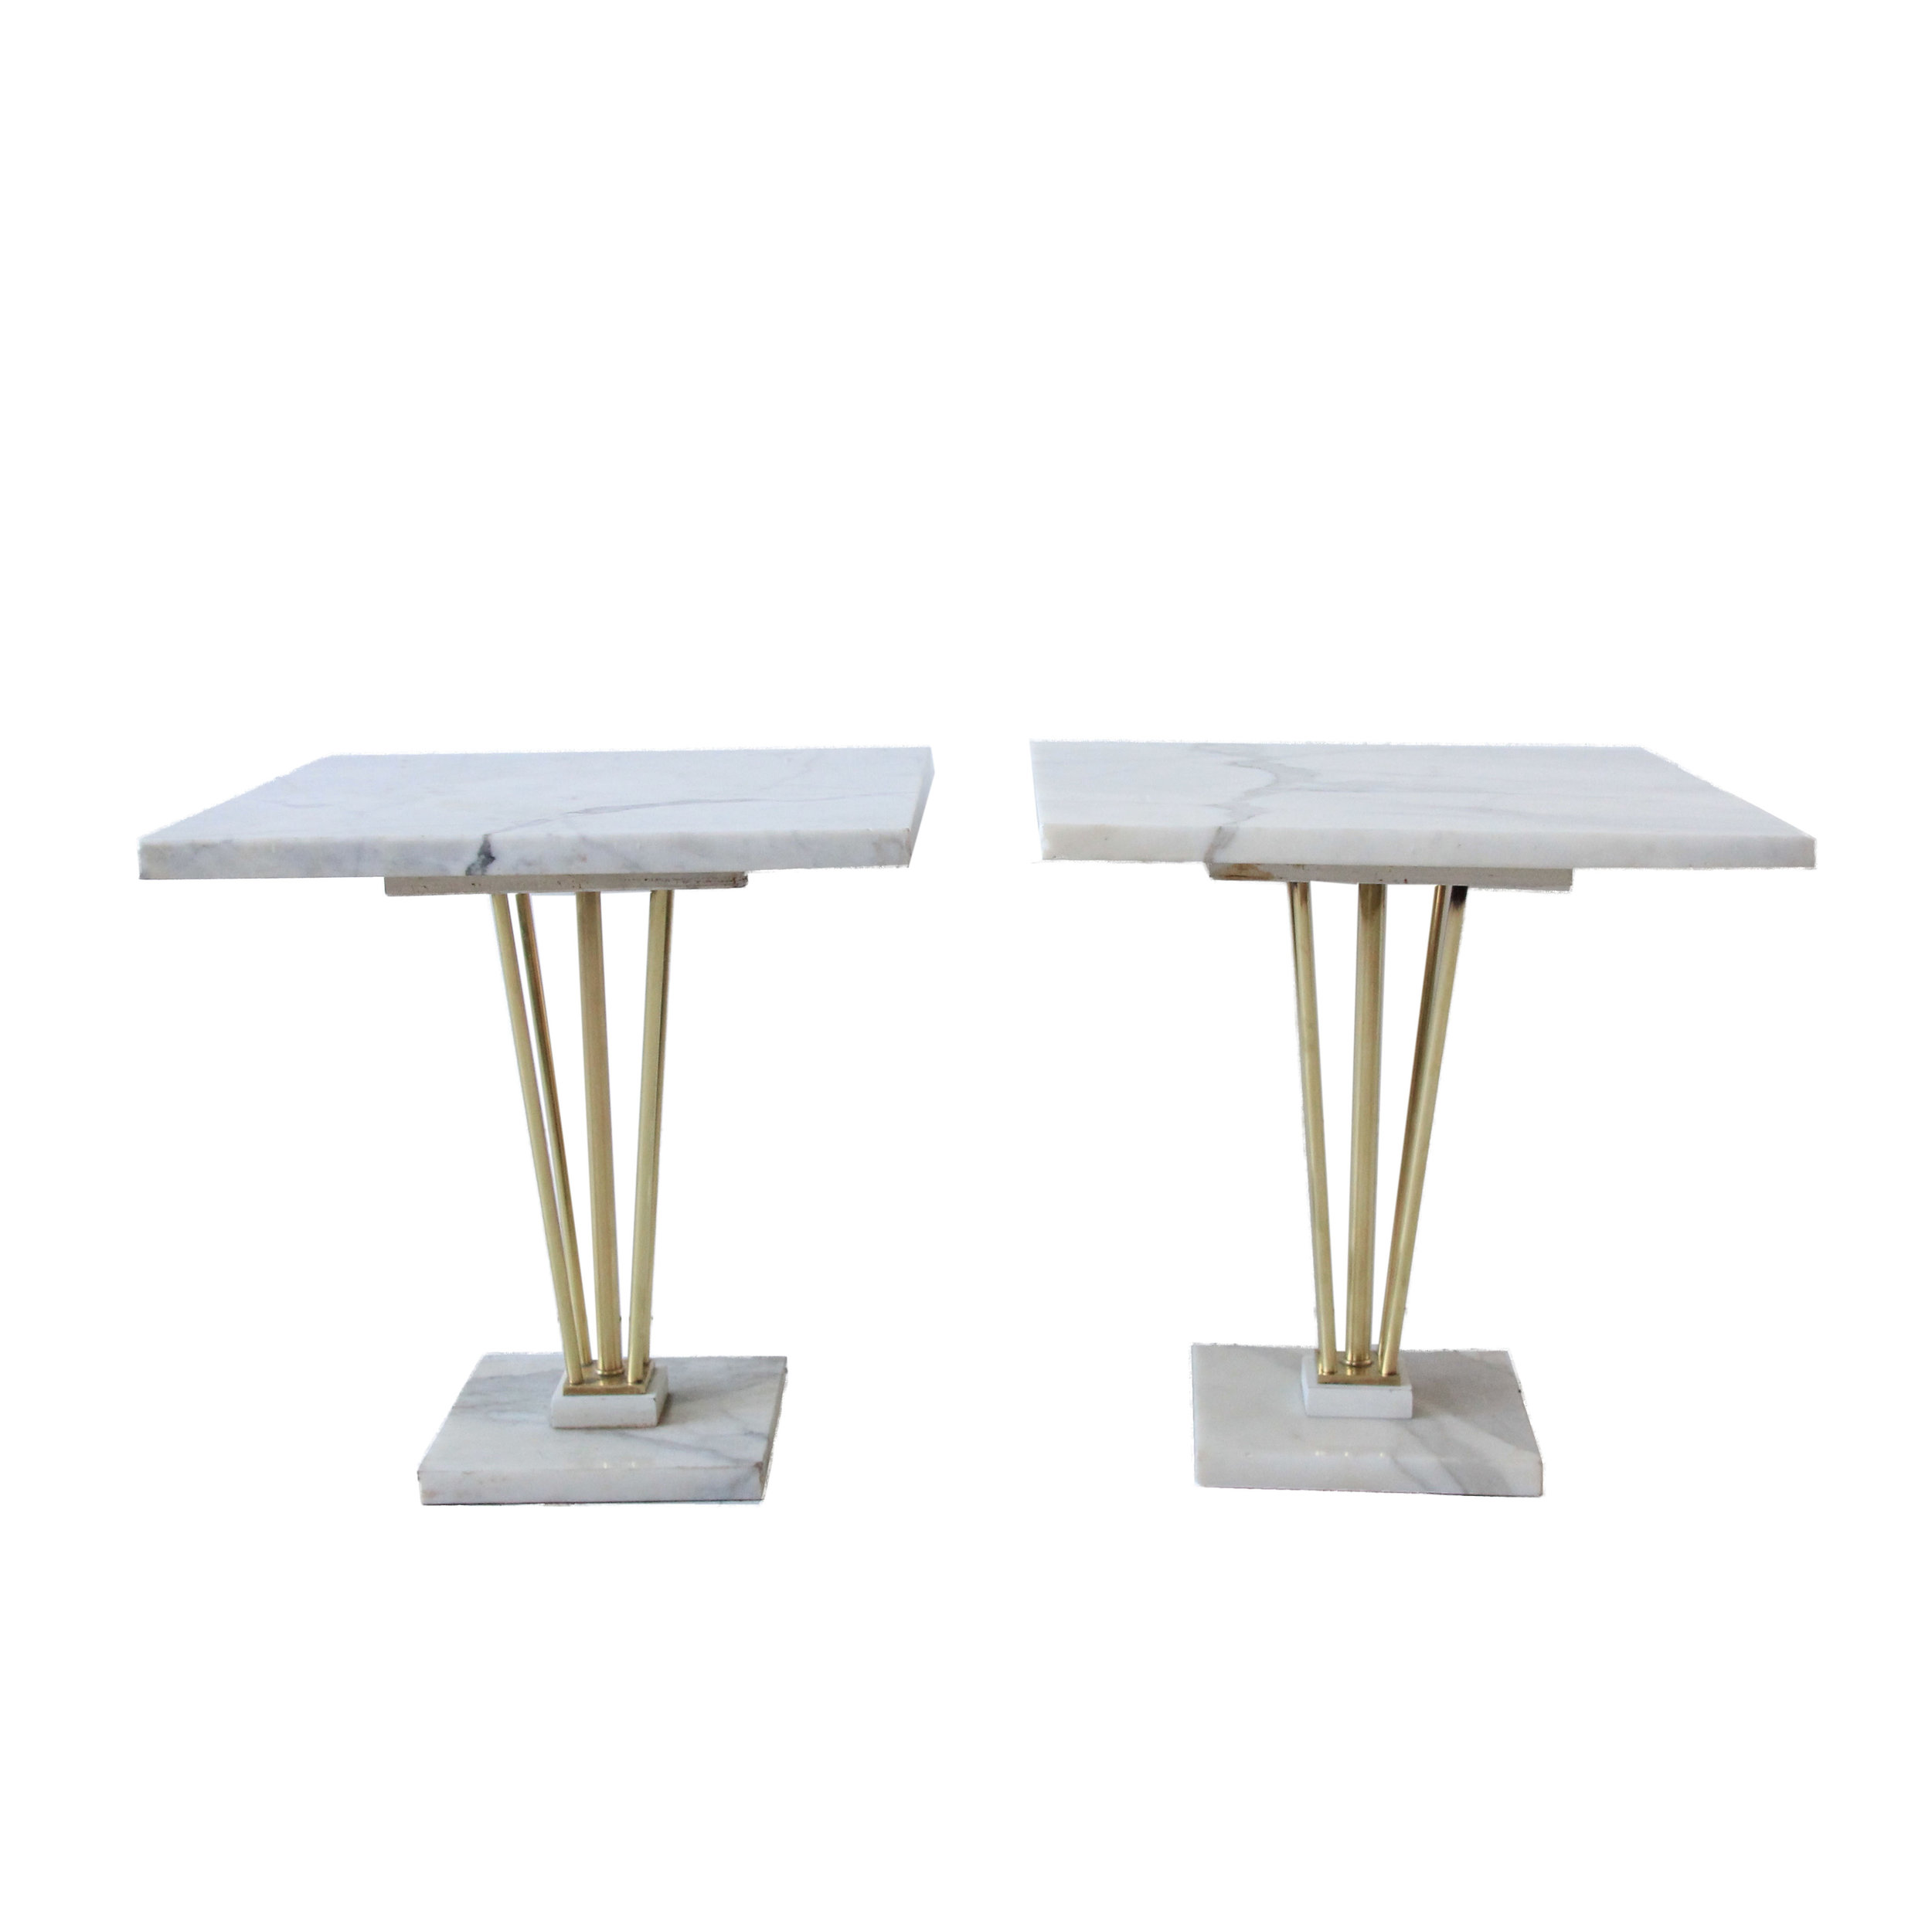 vintage marble and brass side tables.jpg